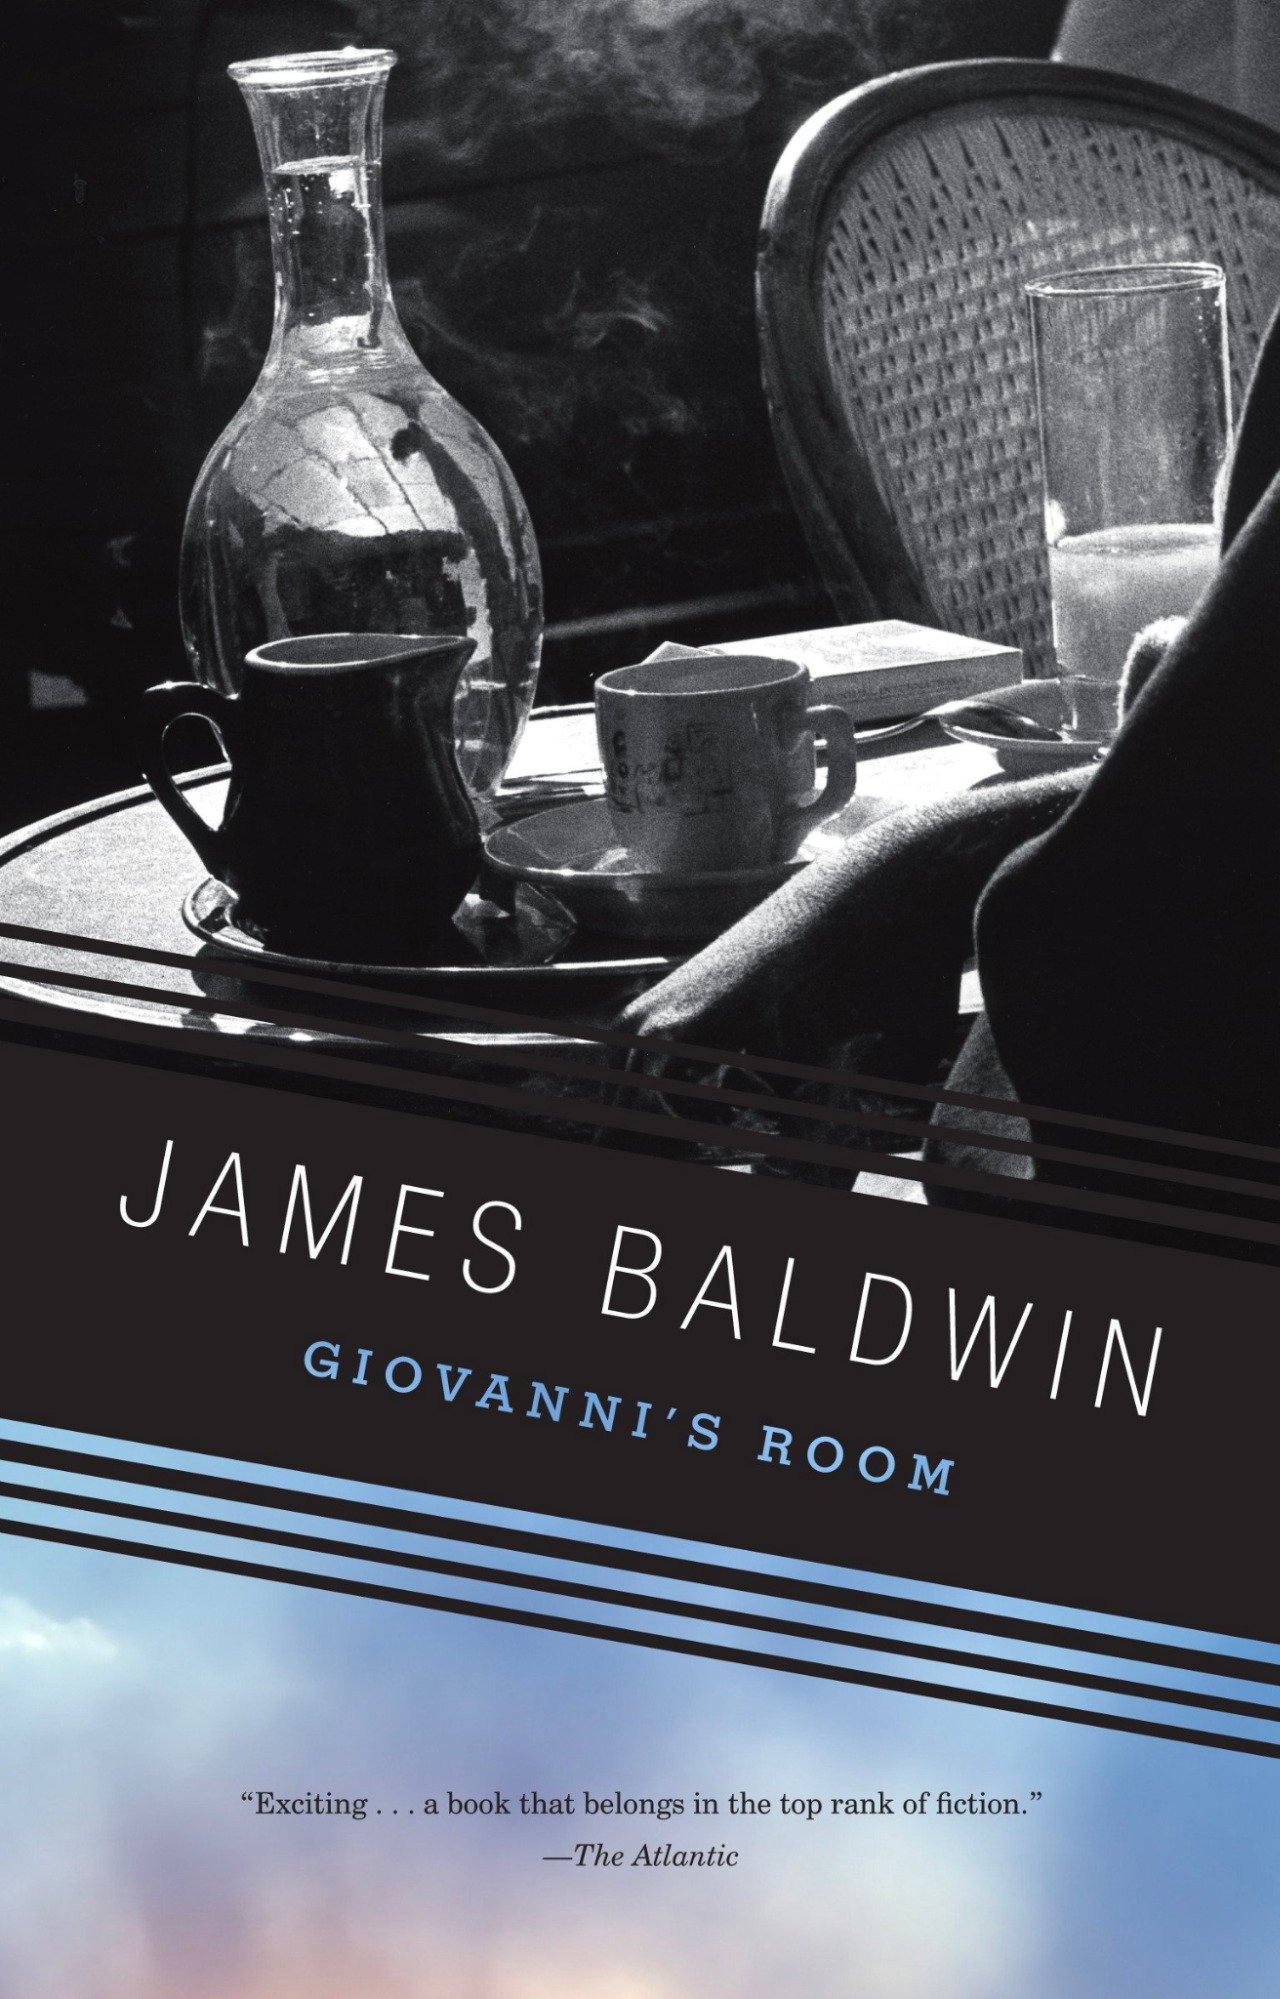 Book Review: Giovanni’s Room